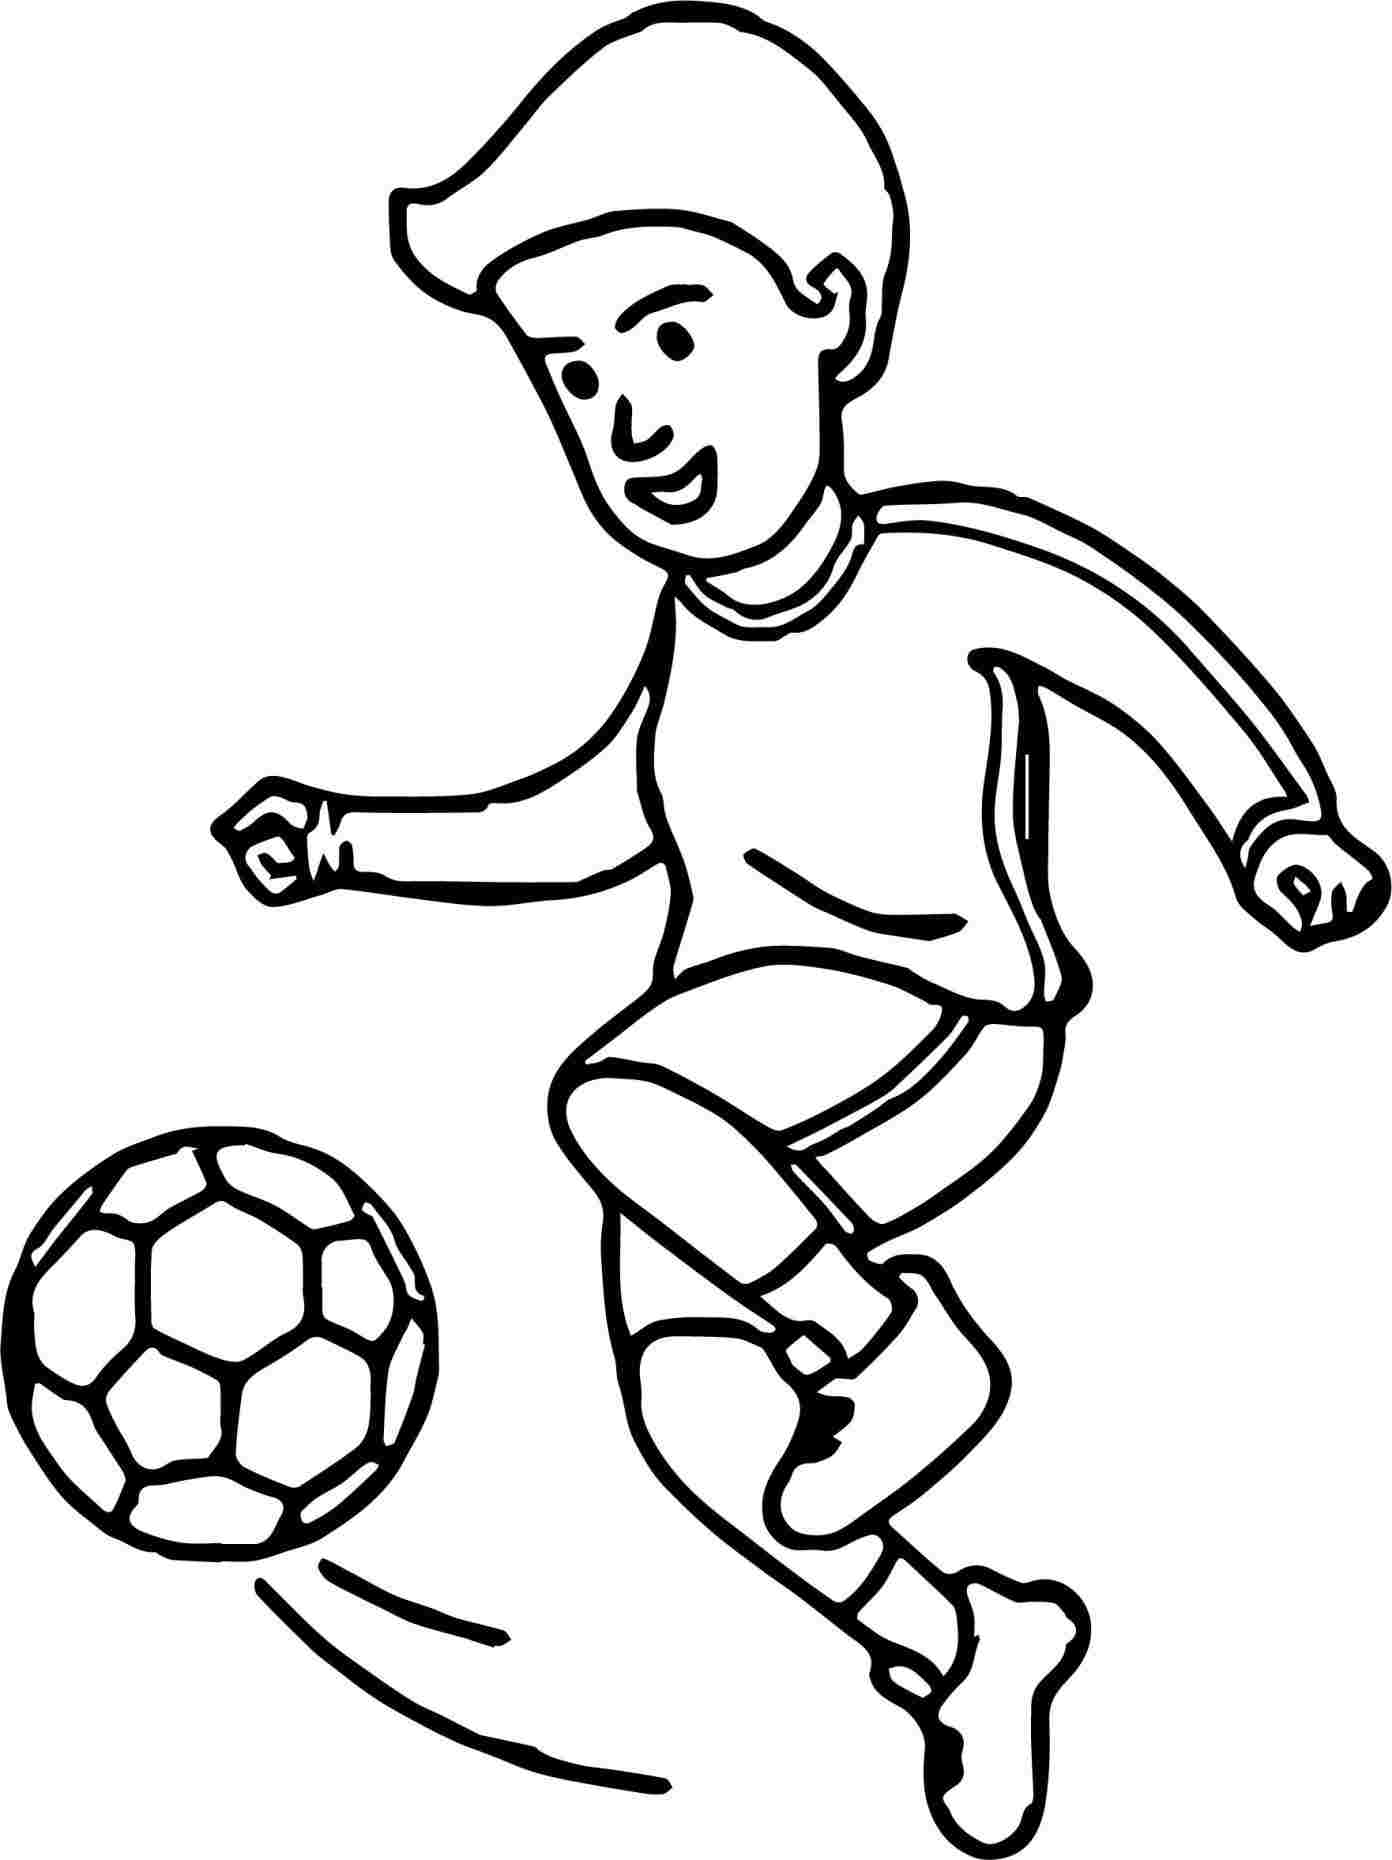 Football Drawing Easy | Free download on ClipArtMag